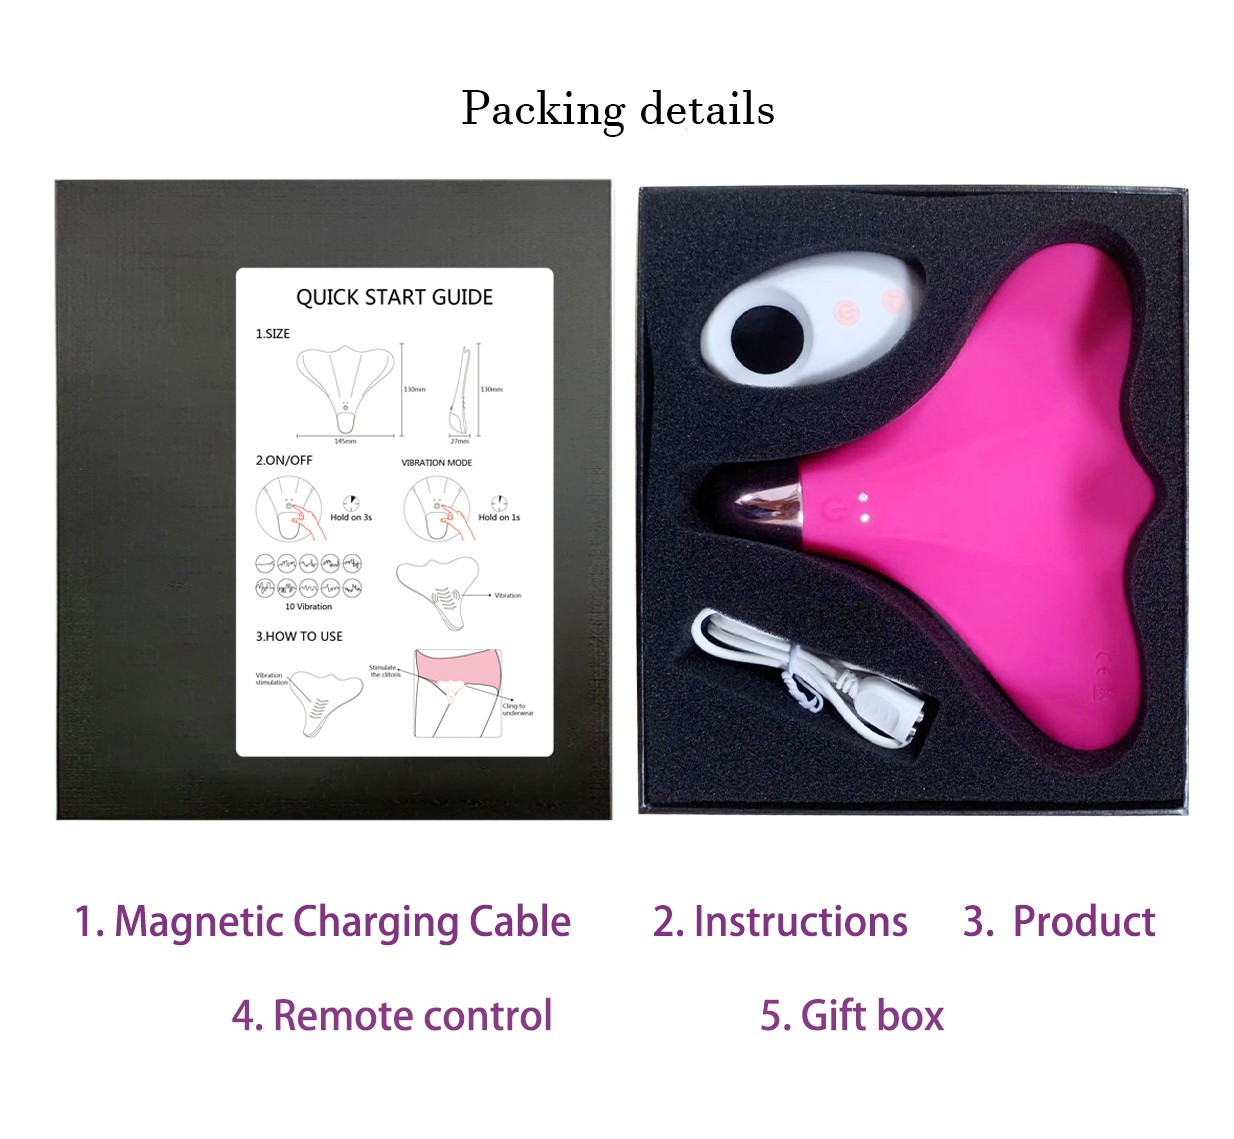 UFO Wearable Couples Vibrator Packing details